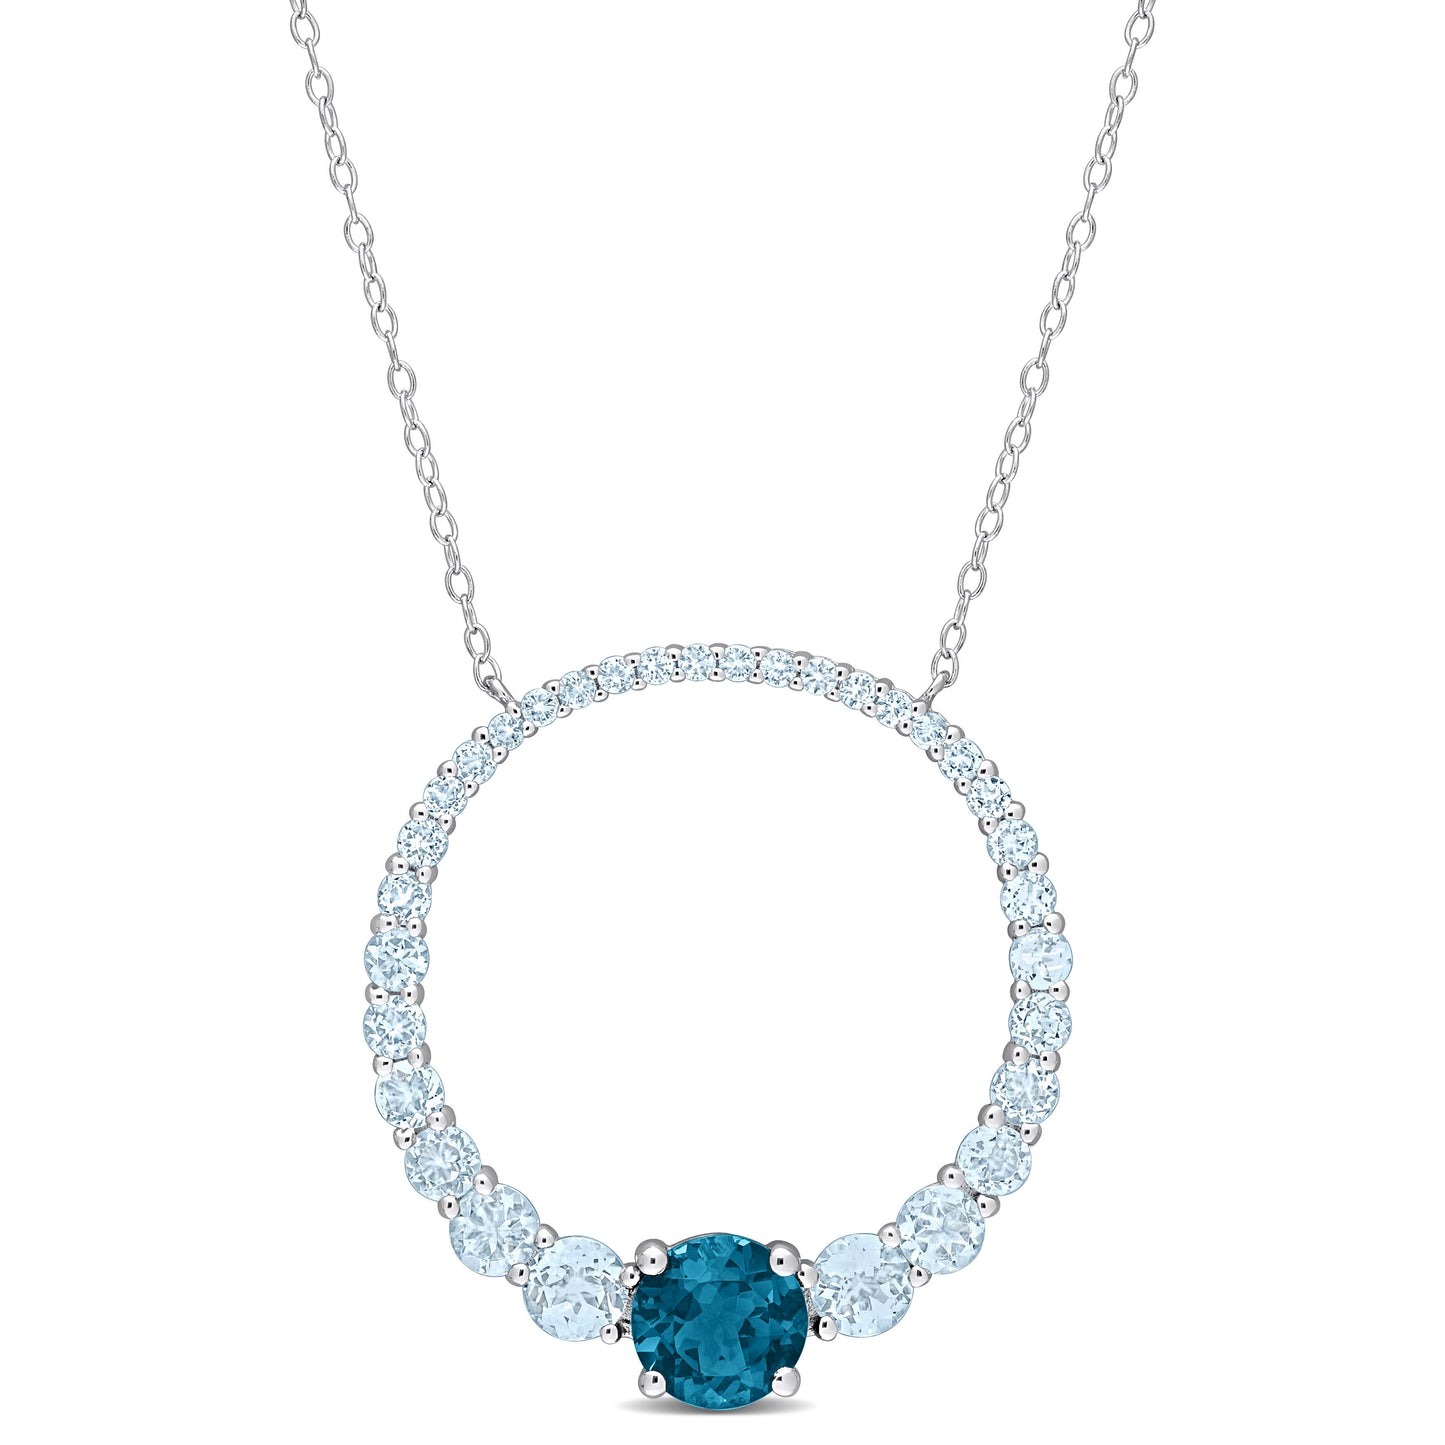 3 7/8ct Blue Topaz Circle Necklace in Sterling Silver